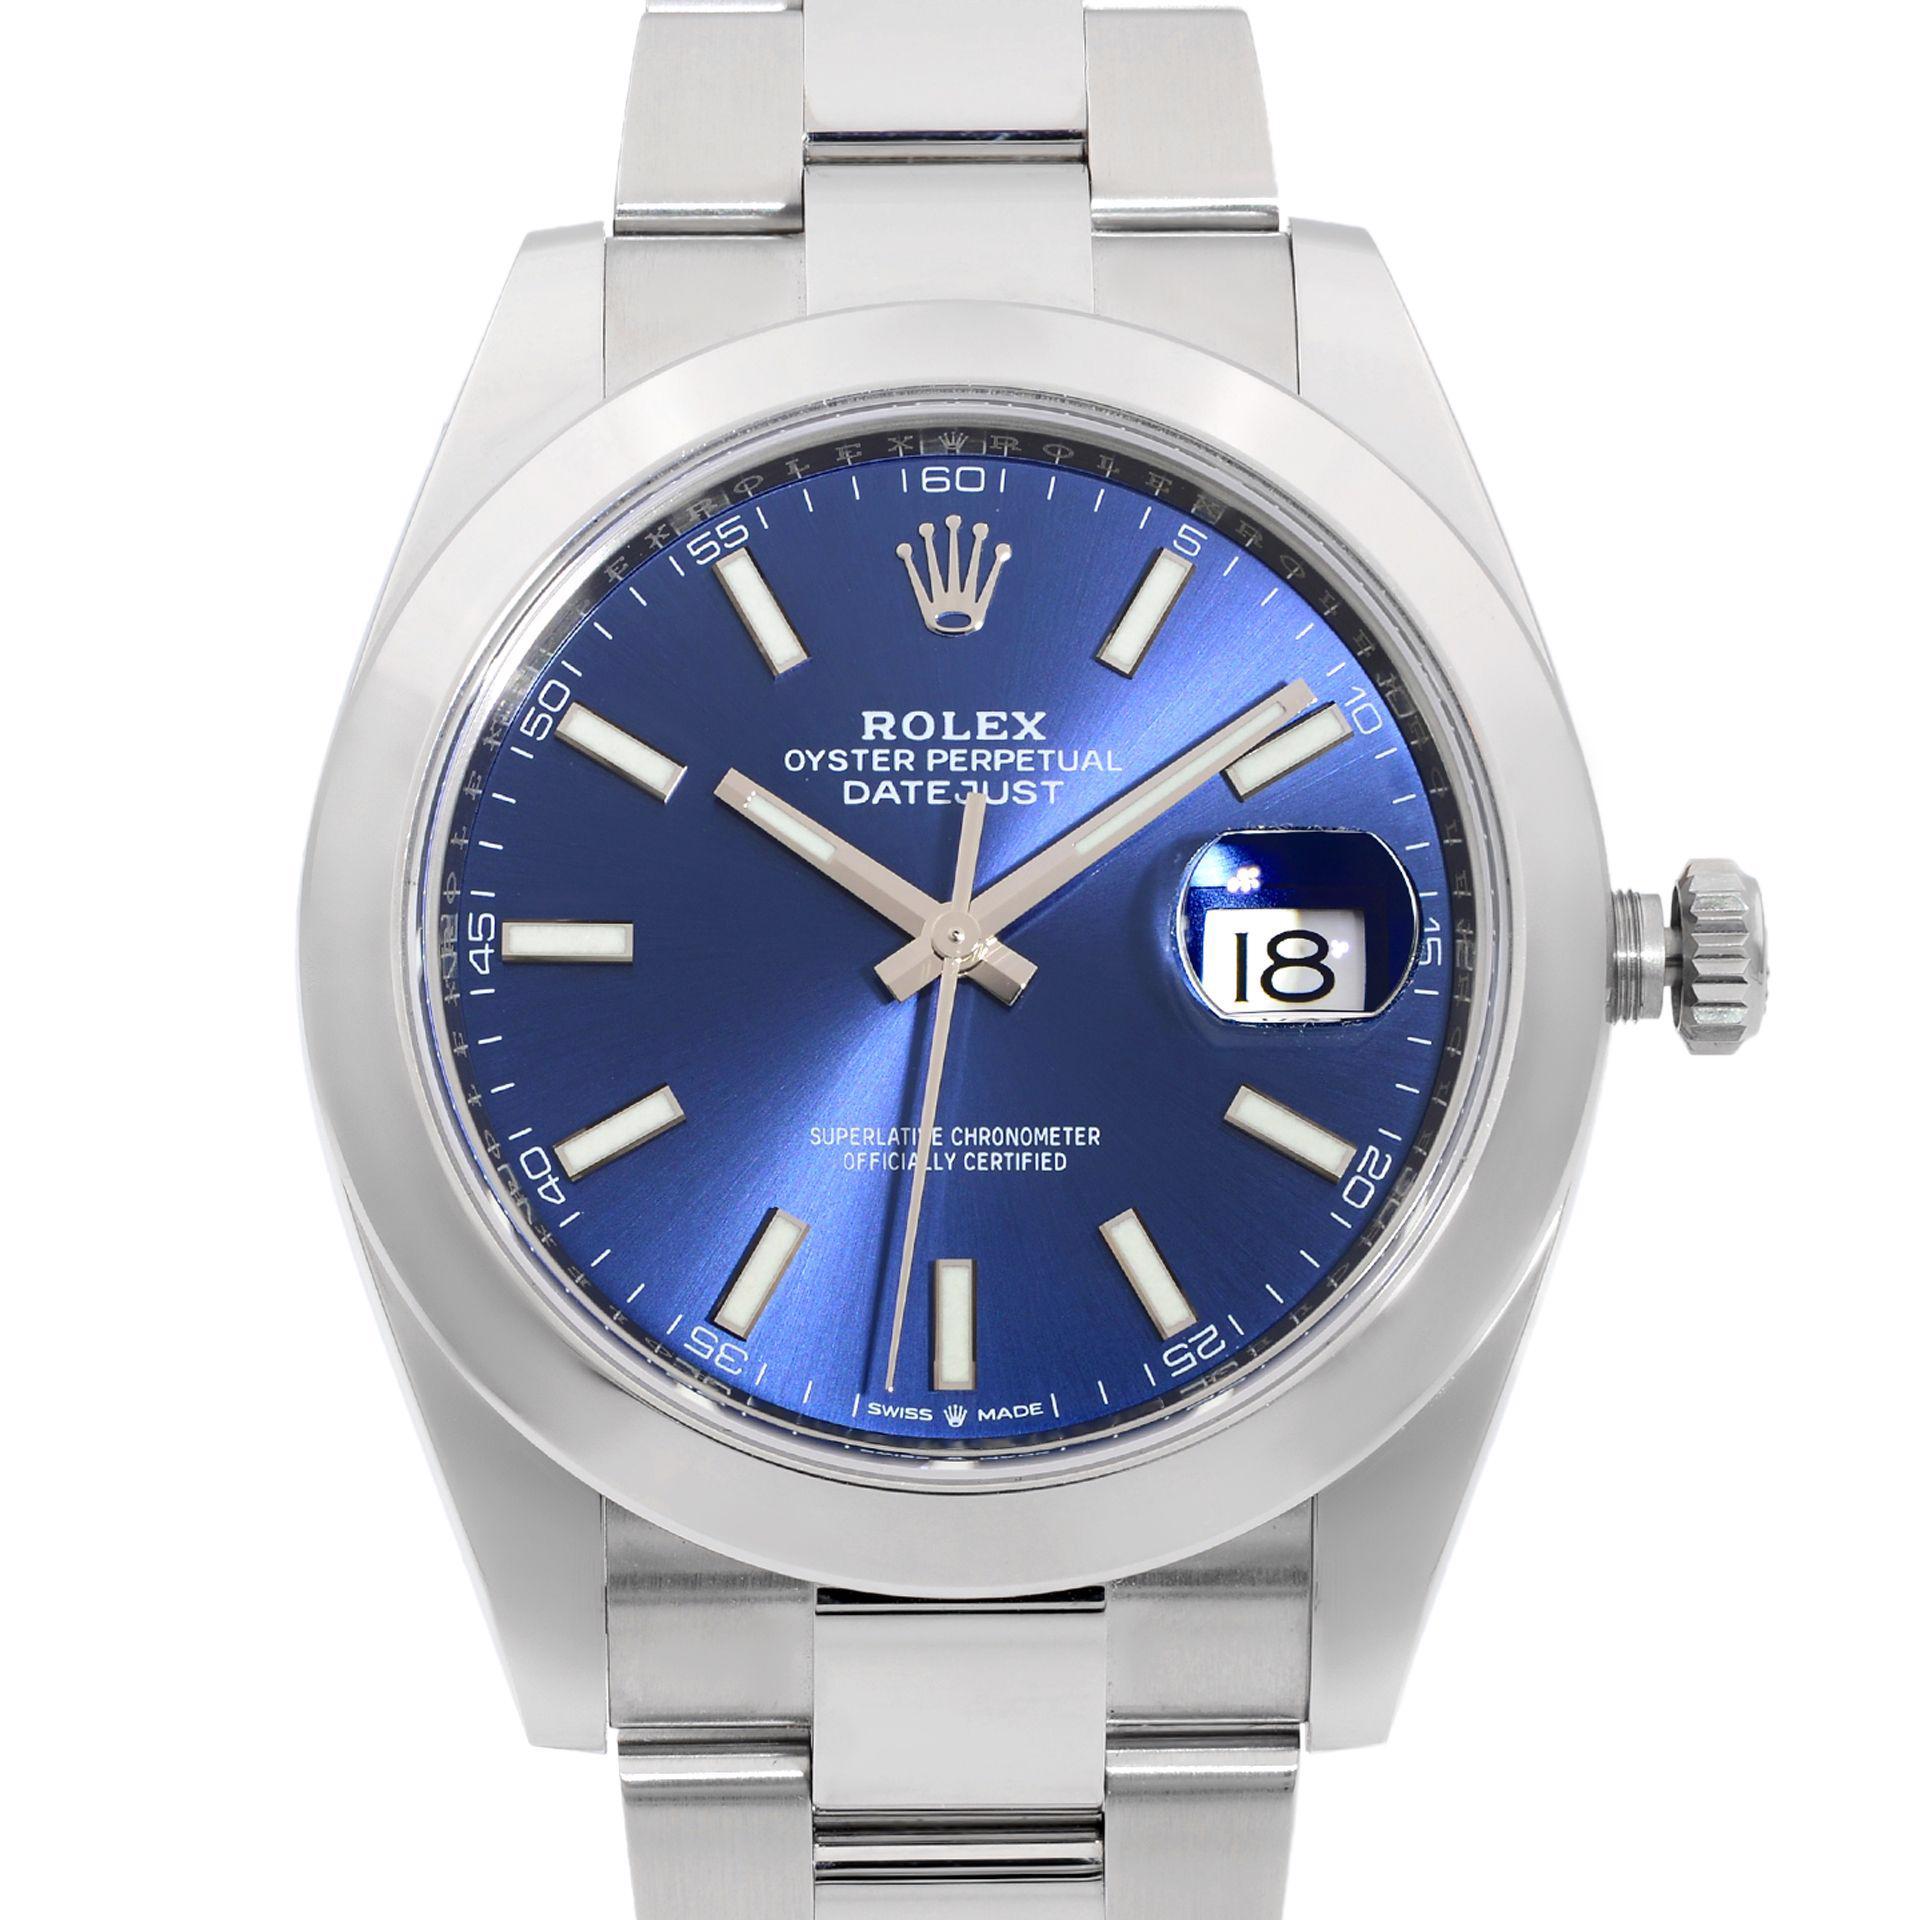 Pre-owned Like New 2020 Card Rolex Datejust 41mm Steel Blue Dial Oyster Band Automatic Mens Watch 126300. 2020 Old Card. This Beautiful Timepiece is Powered by Mechanical (Automatic) Movement And Features: Round Stainless Steel Case With a Stainless